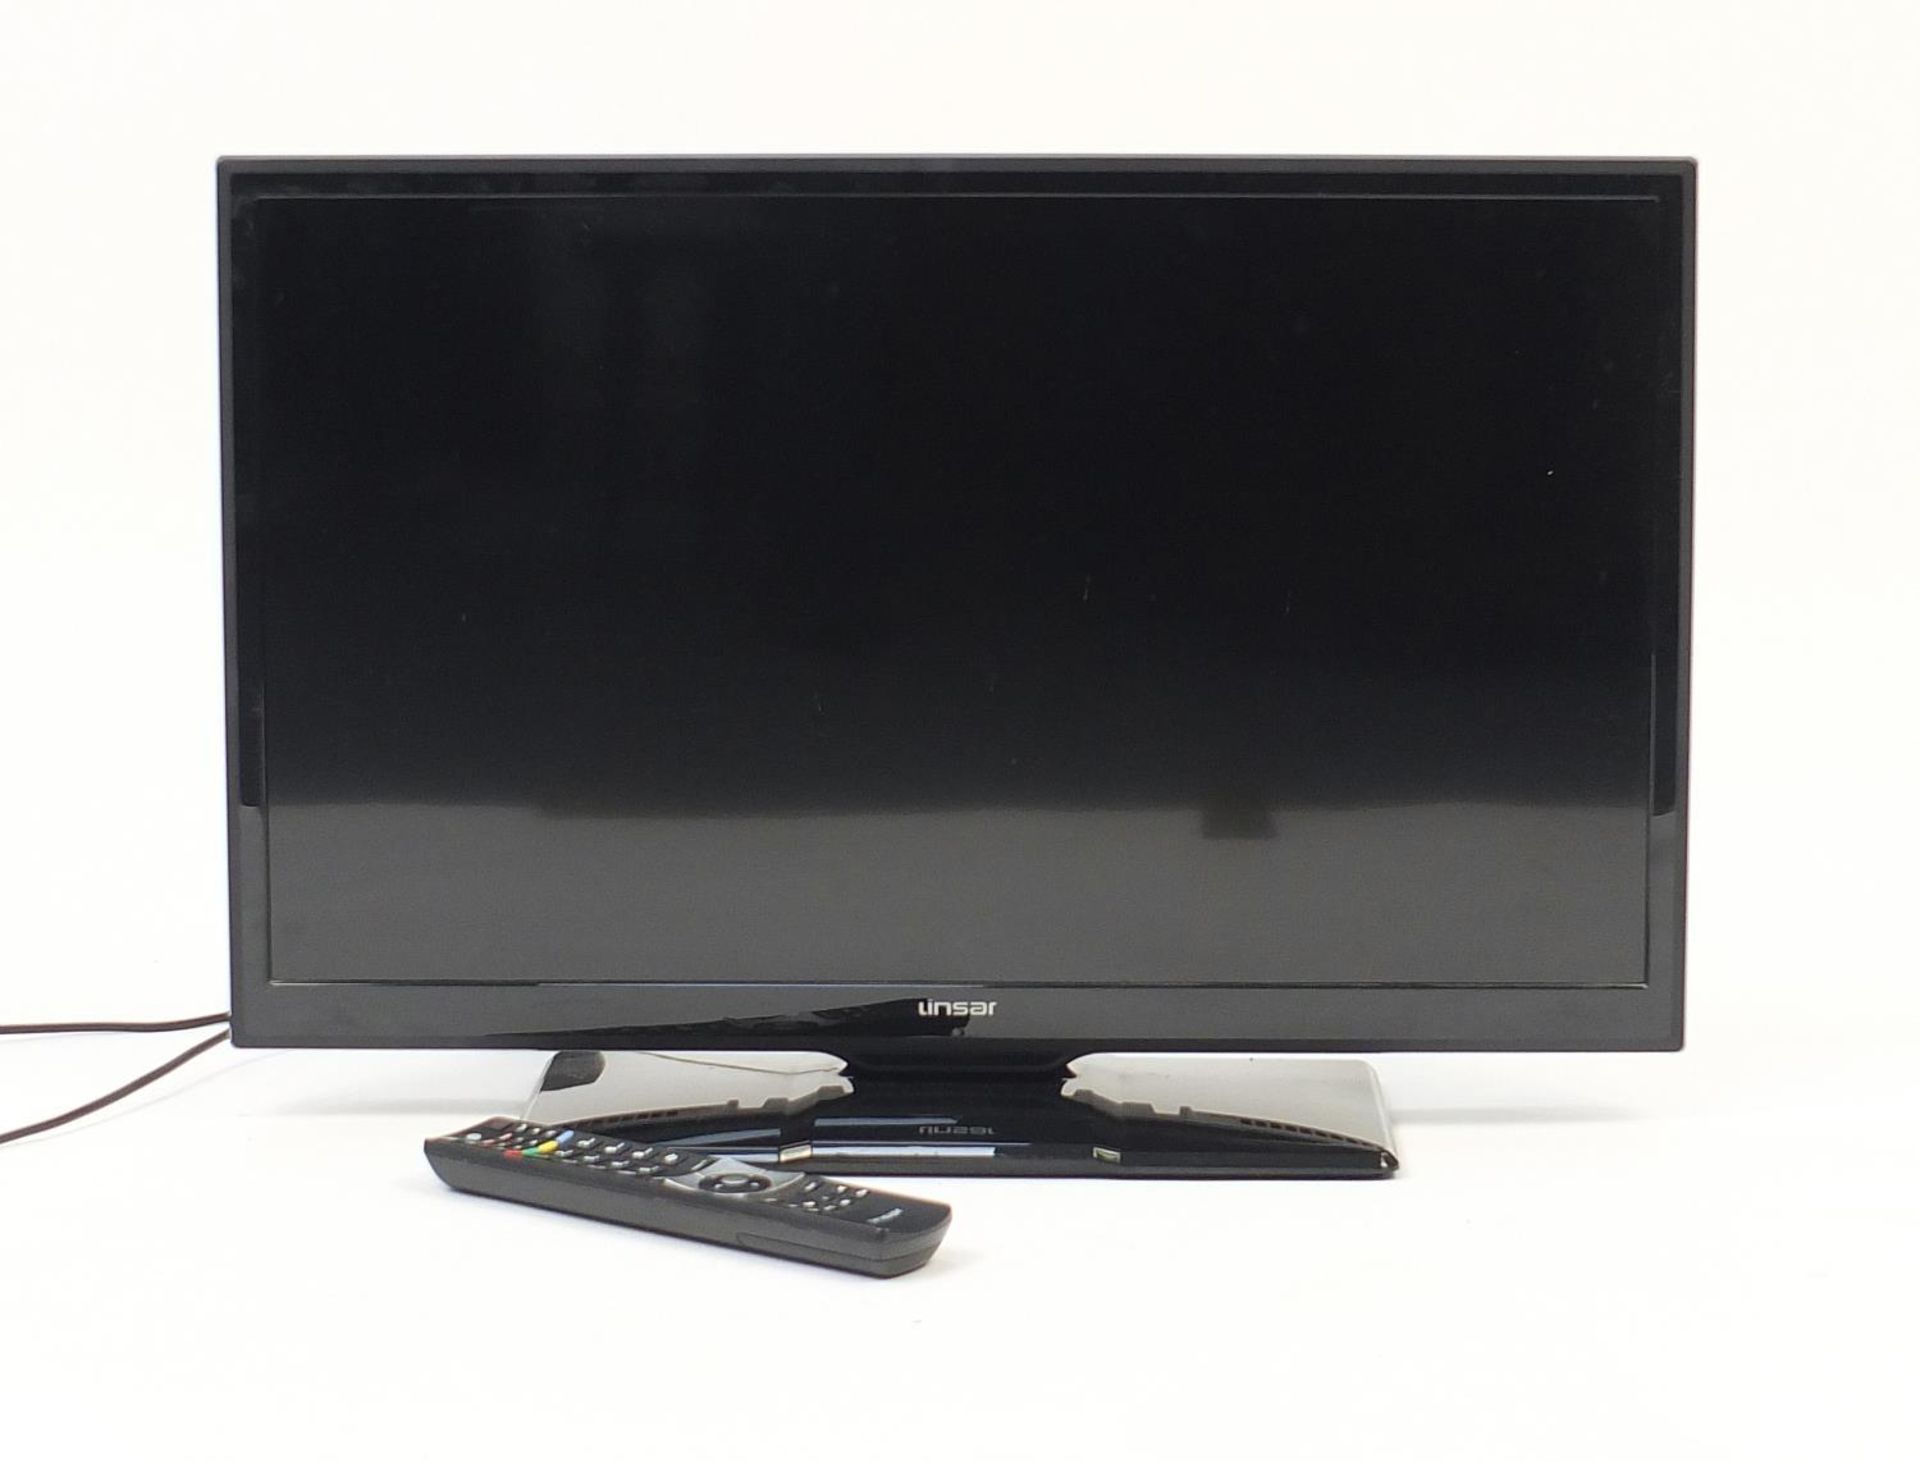 Linsar 28 inch LED TV with remote control :